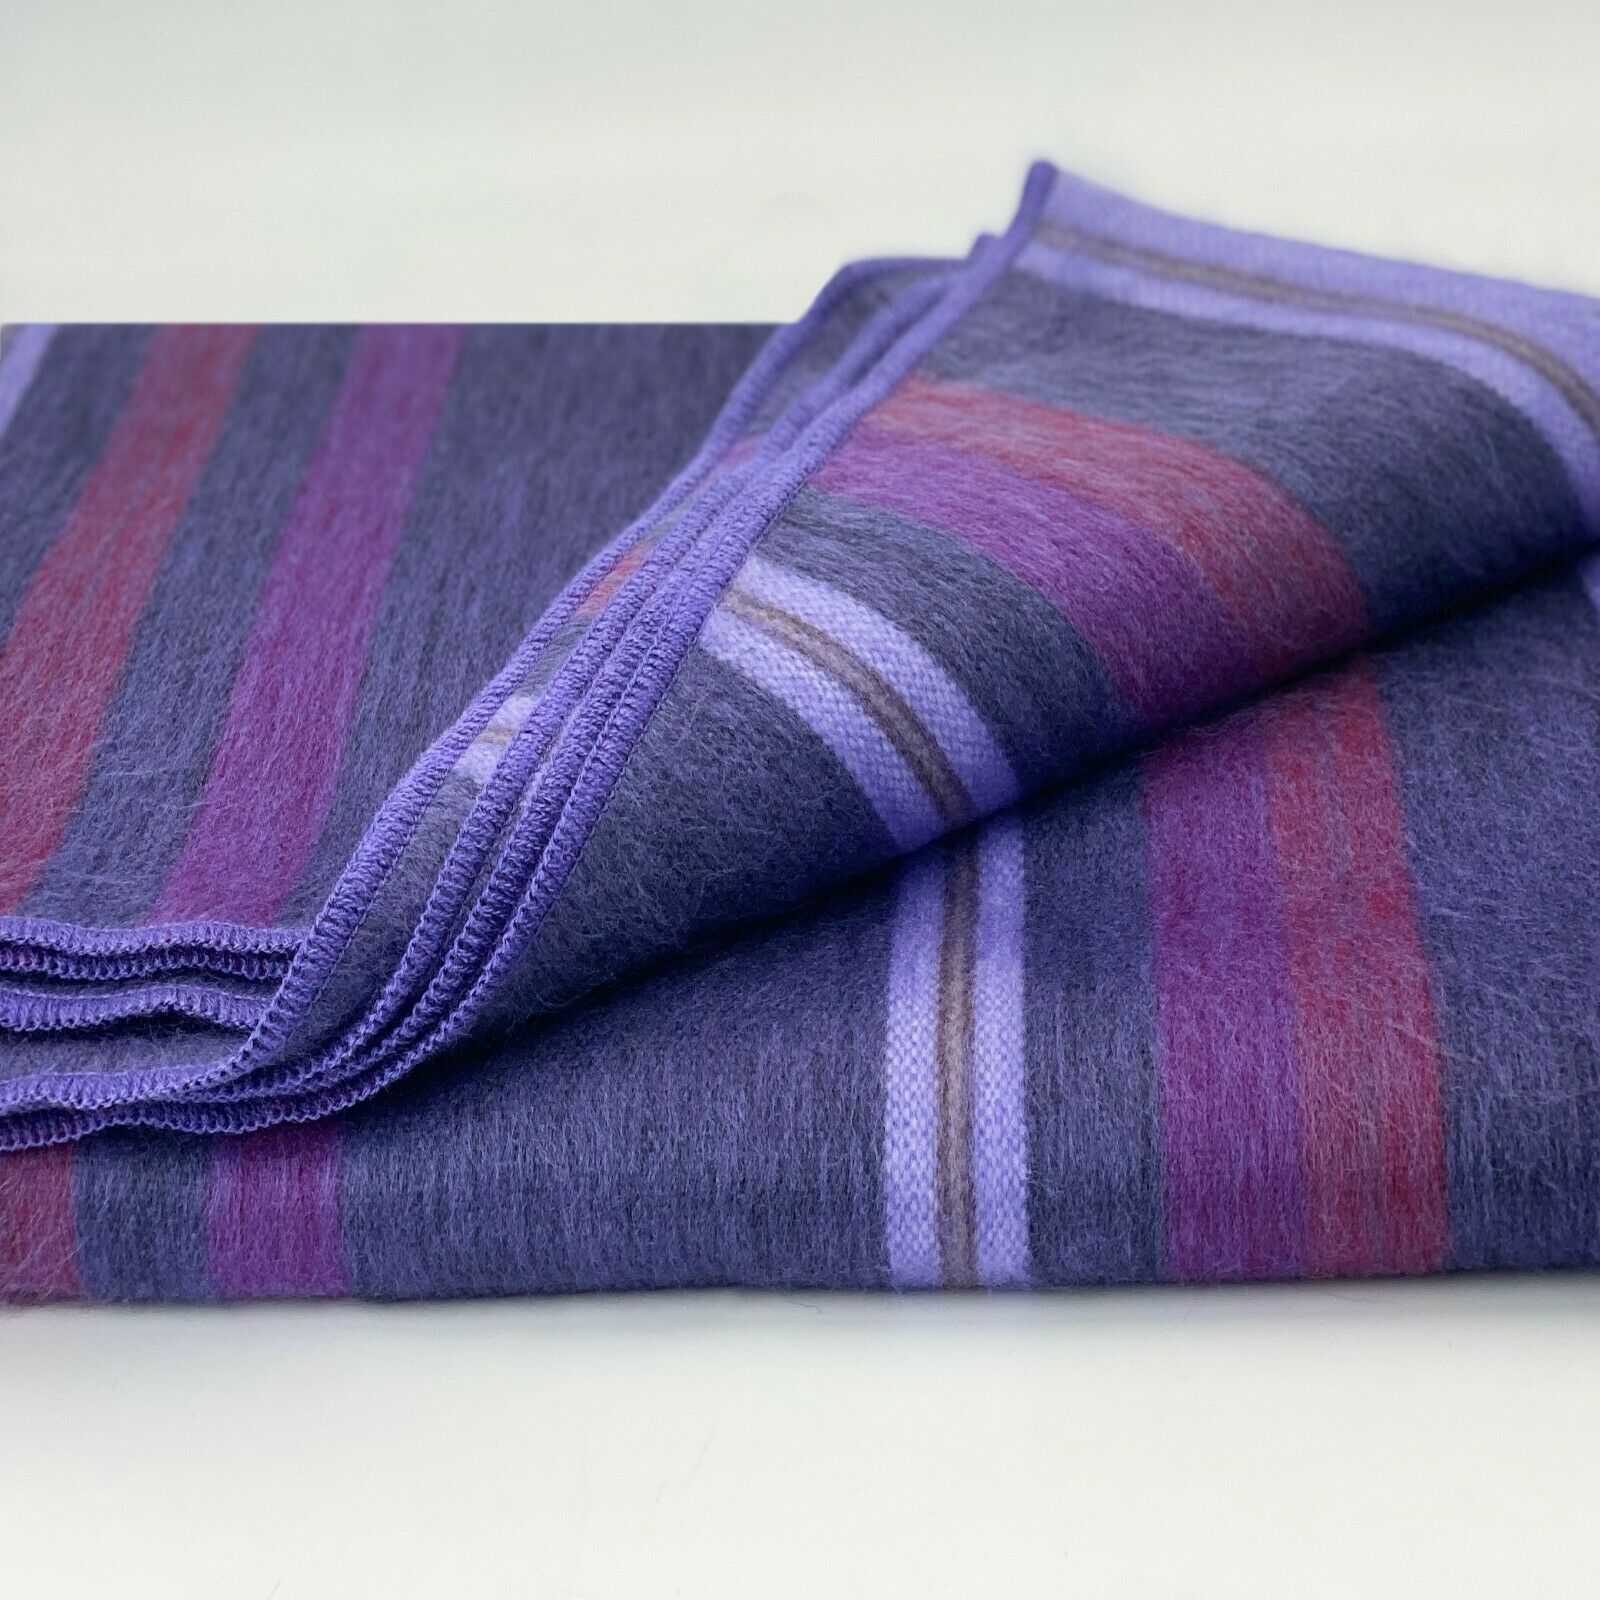 Punguloma - Baby Alpaca Wool Throw Blanket / Sofa Cover - Queen 97" x 67" - striped pattern blue/purple/violet